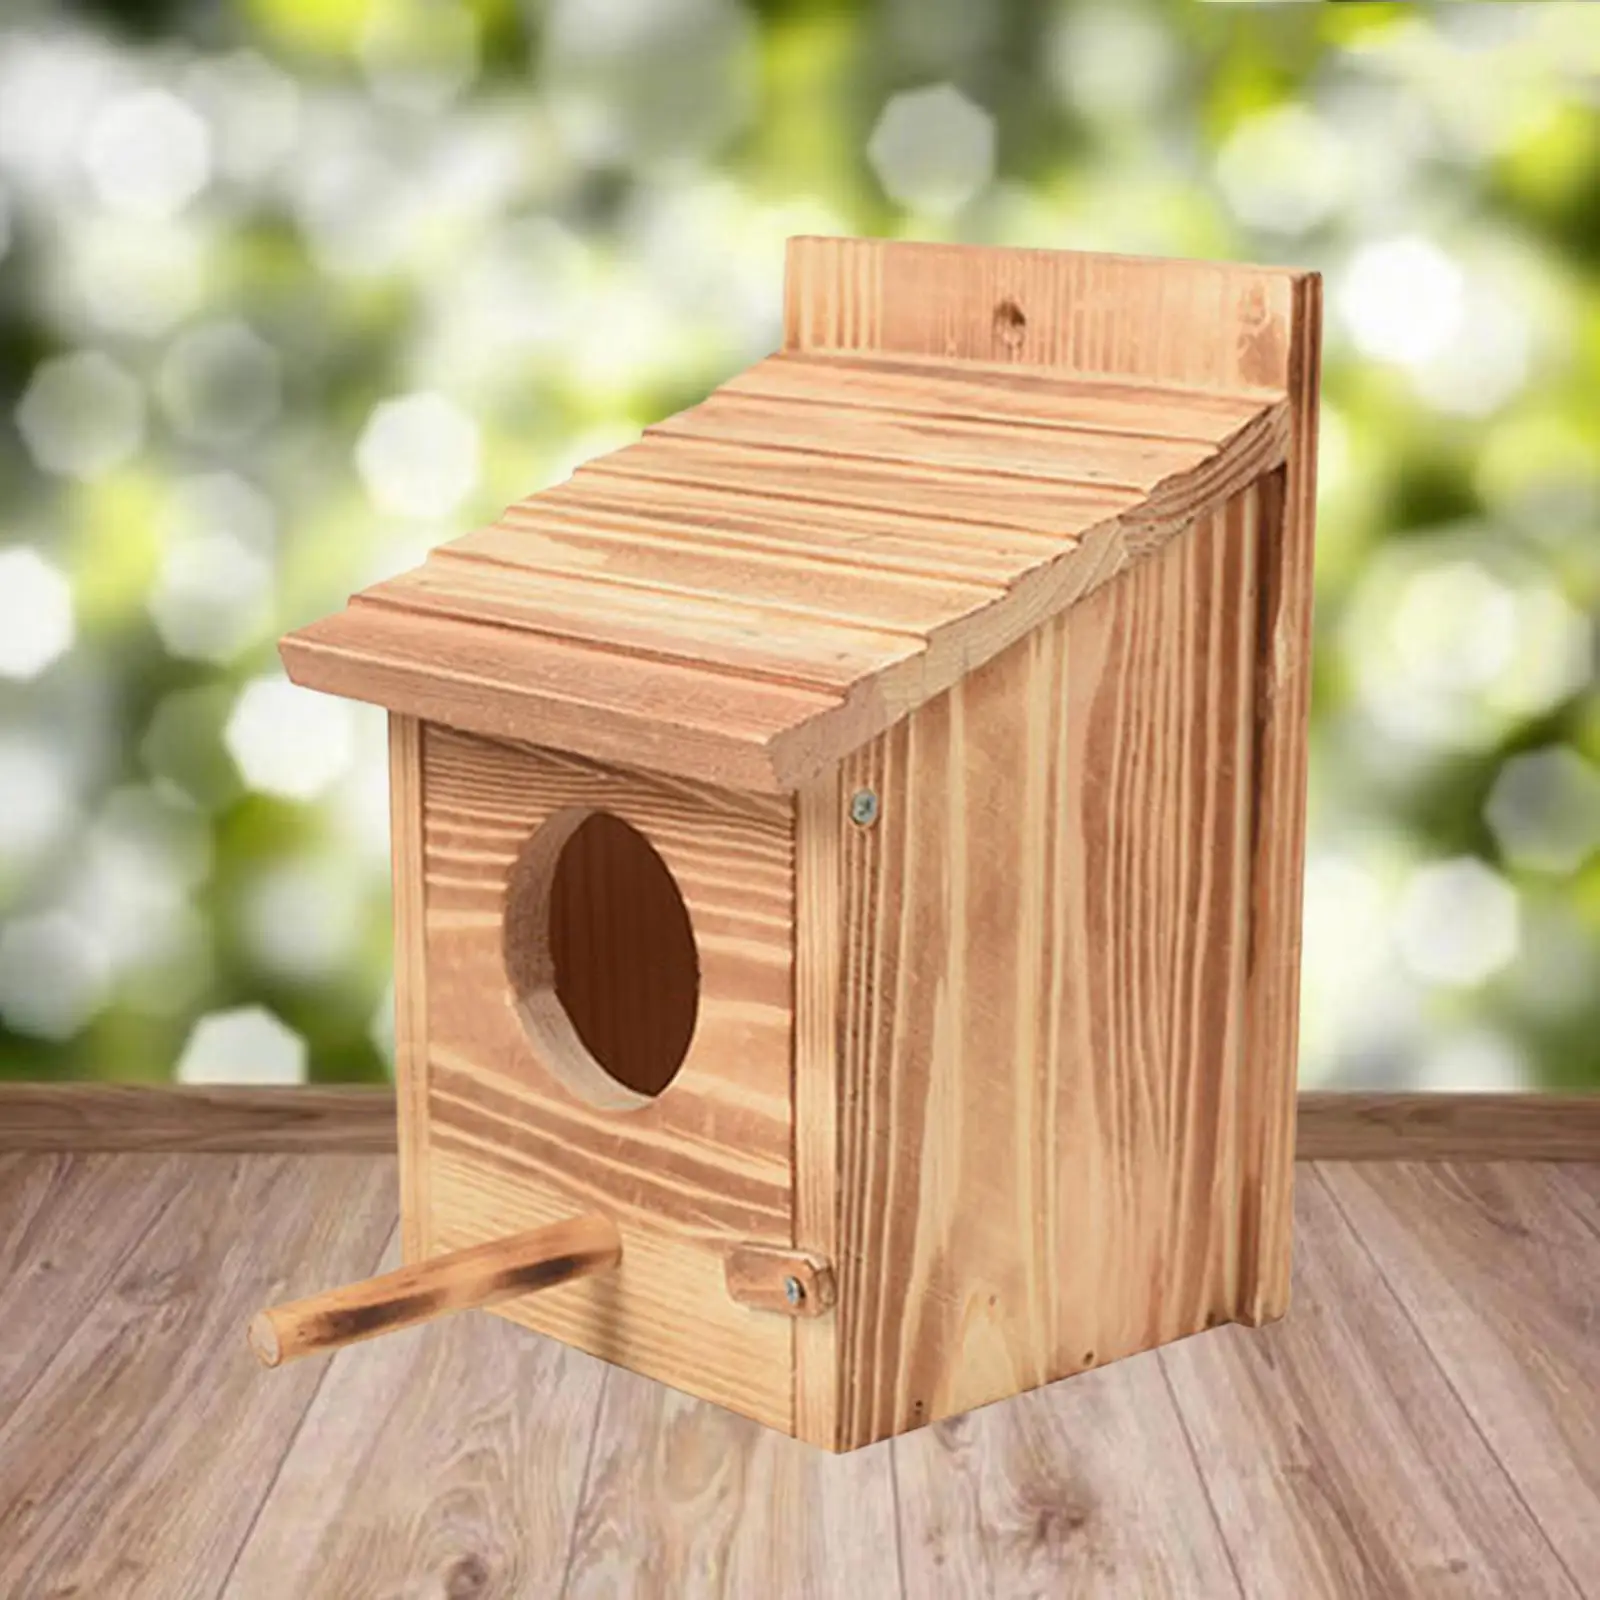 Wooden Pet Bird Nests House Breeding Box Cage Birdhouse Accessories for Parrots